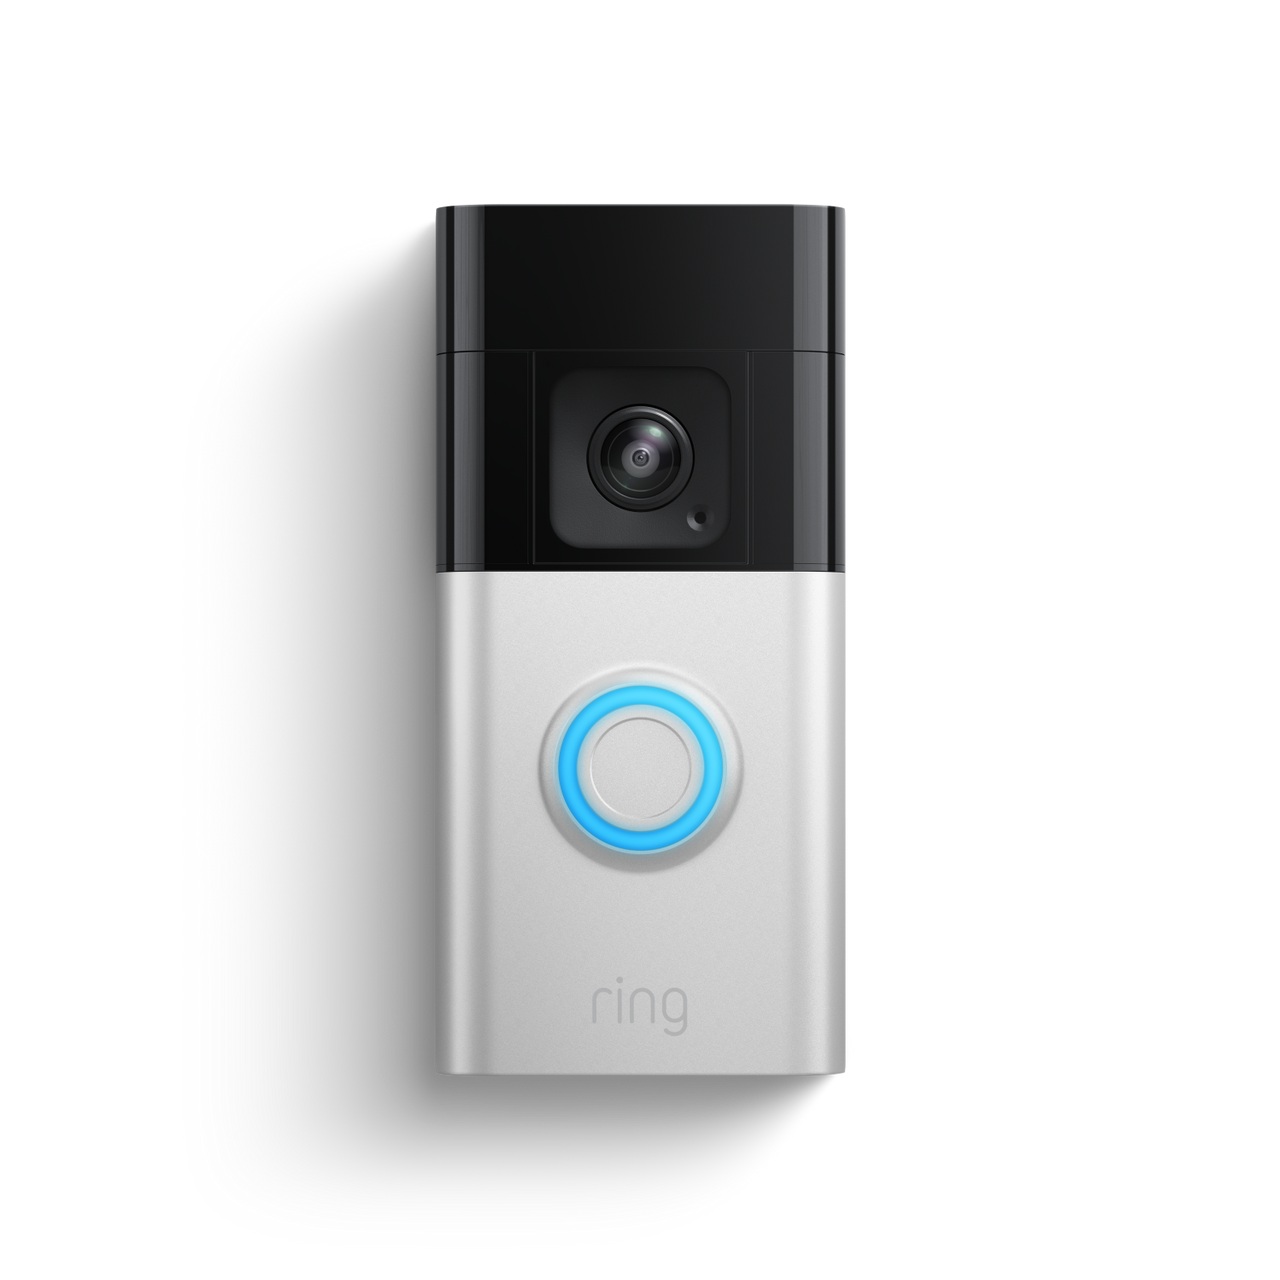 files/ring_battery-video-doorbell-pro_sn_01_product_front_wall_1500x1500_99f75da9-ffce-42b8-822c-d662869e703c.png